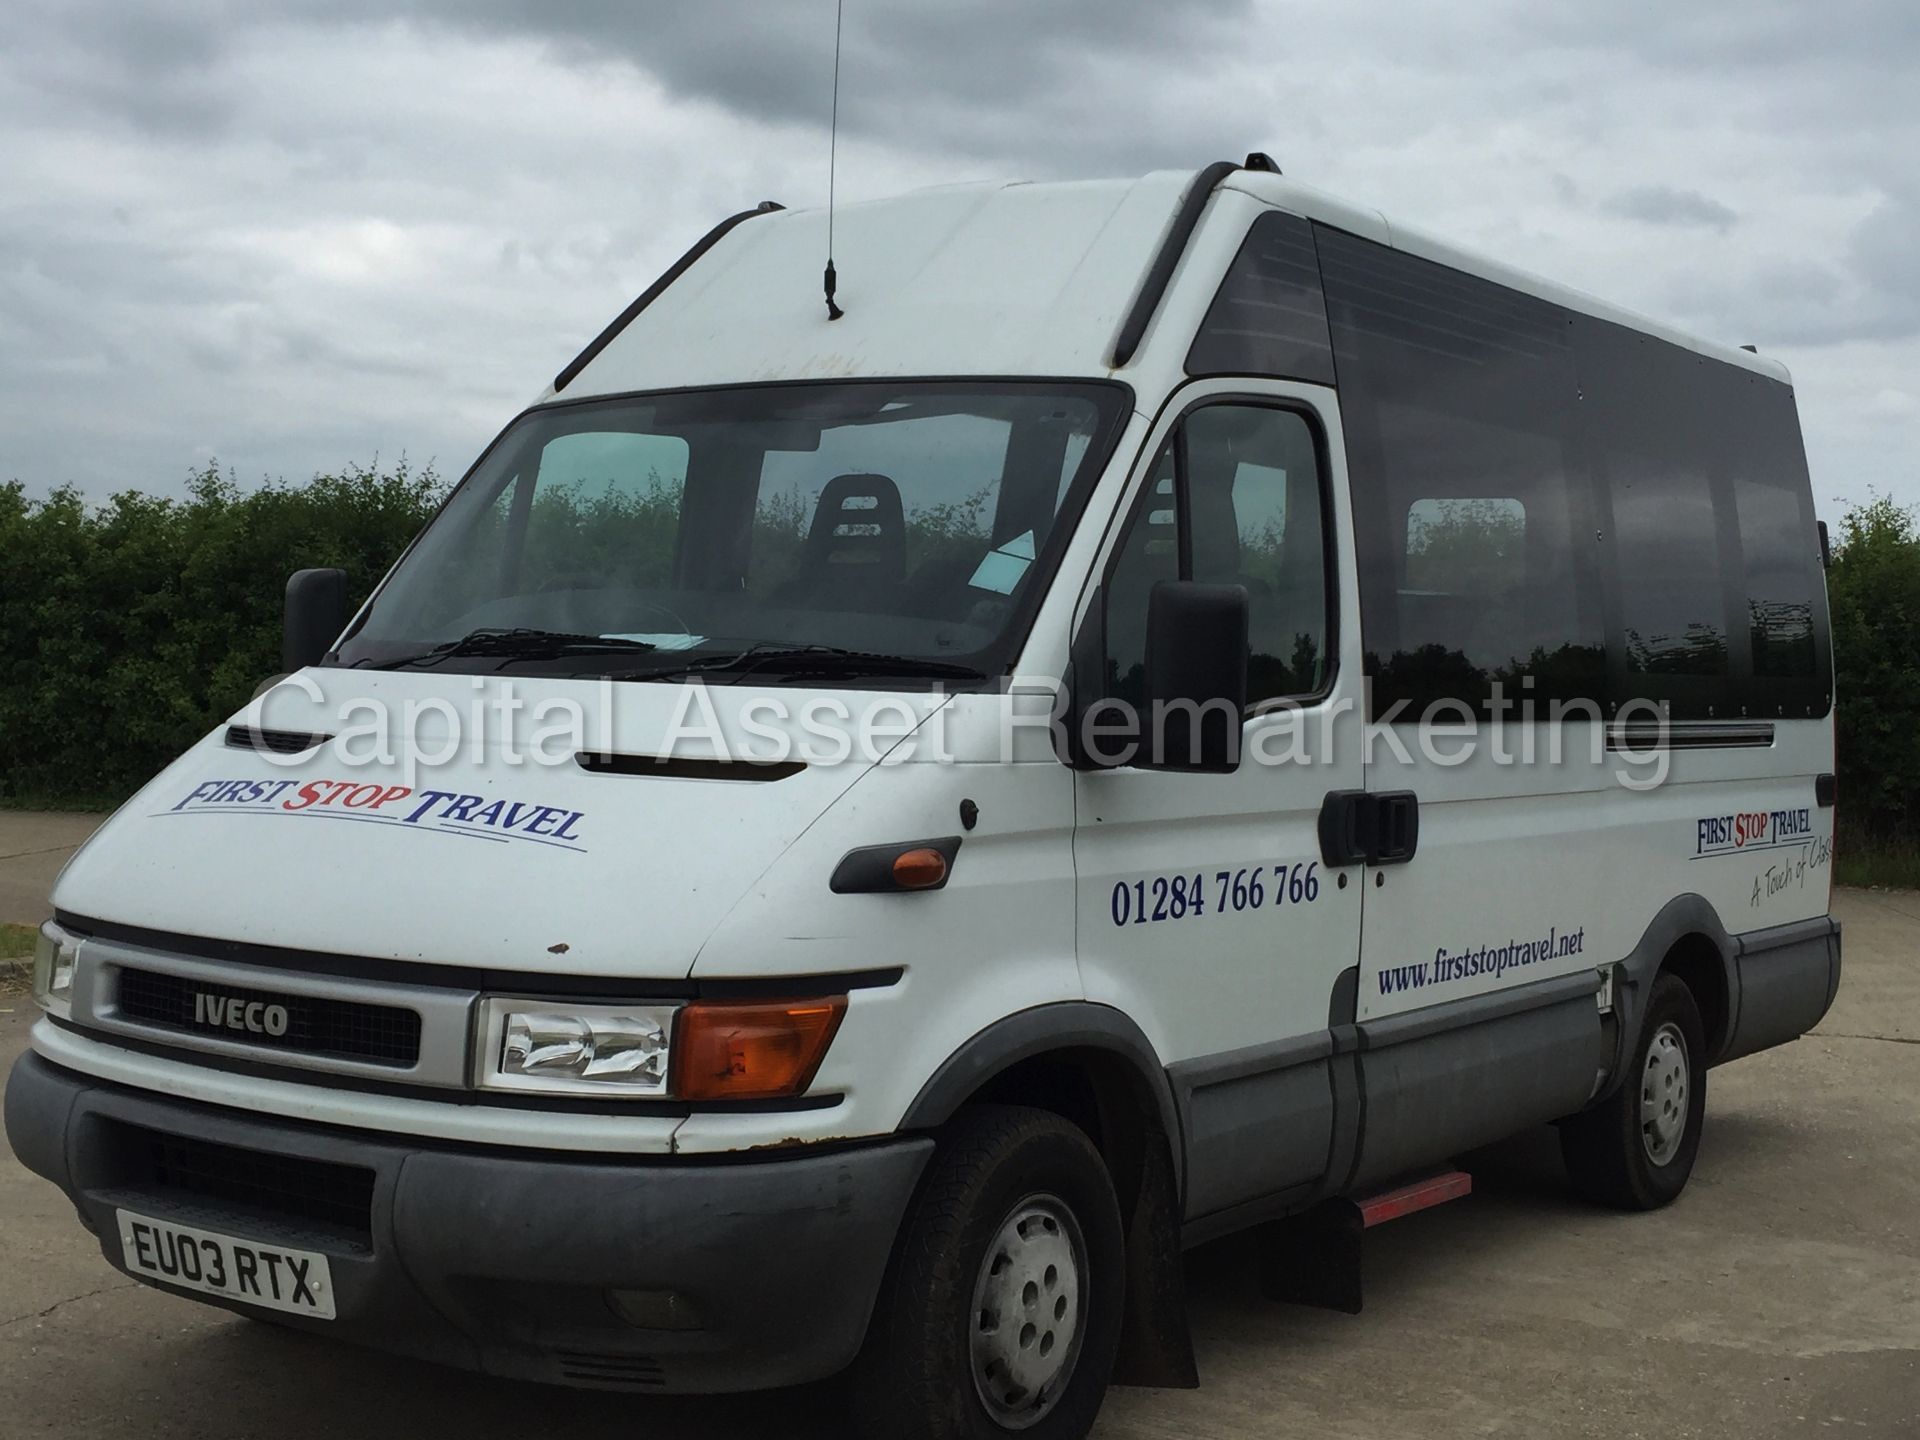 (on sale) IVECO DAILY 35S13 '14 SEATER MINI-BUS' (2003 - 03 REG) '2.3 DIESEL - 6 SPEED' (NO VAT) - Image 3 of 23